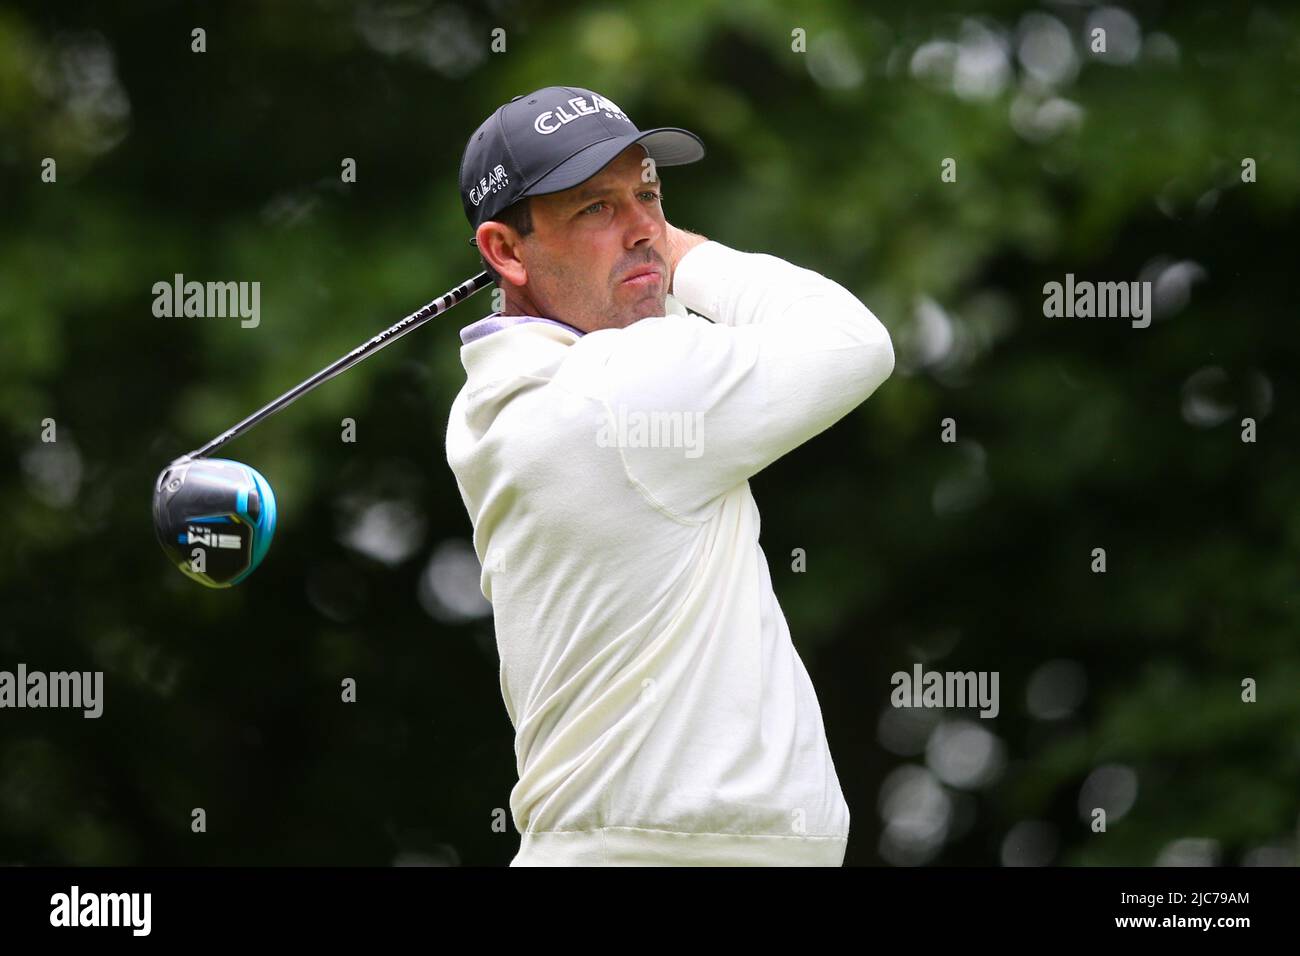 ST ALBANS, ENGLAND - JUNE 09: Charl Schwartzel of South Africa tees off on the 4th hole during day one of the LIV Golf Invitational at The Centurion Club on June 9, 2022 in St Albans, England. (MB Media) Stock Photo